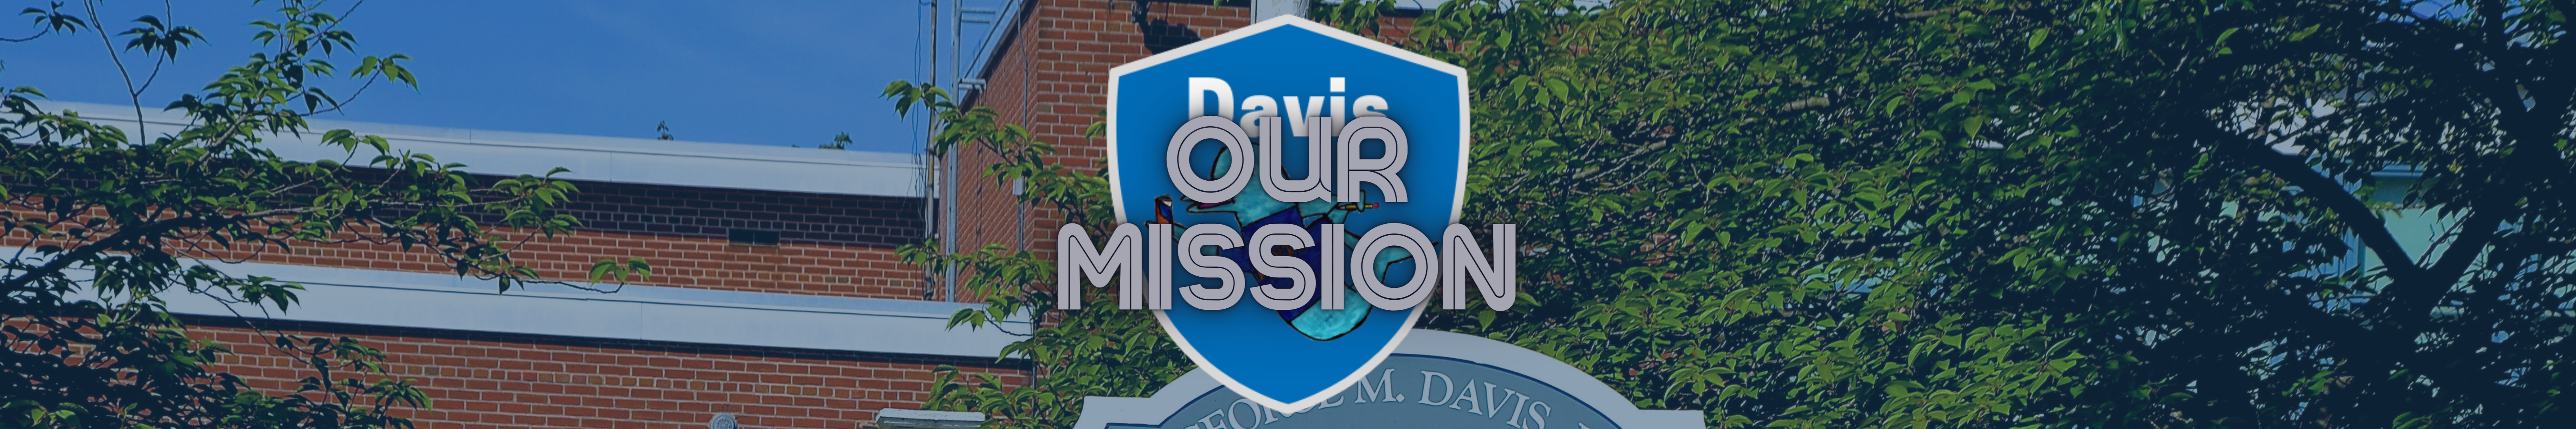 Our Mission banner